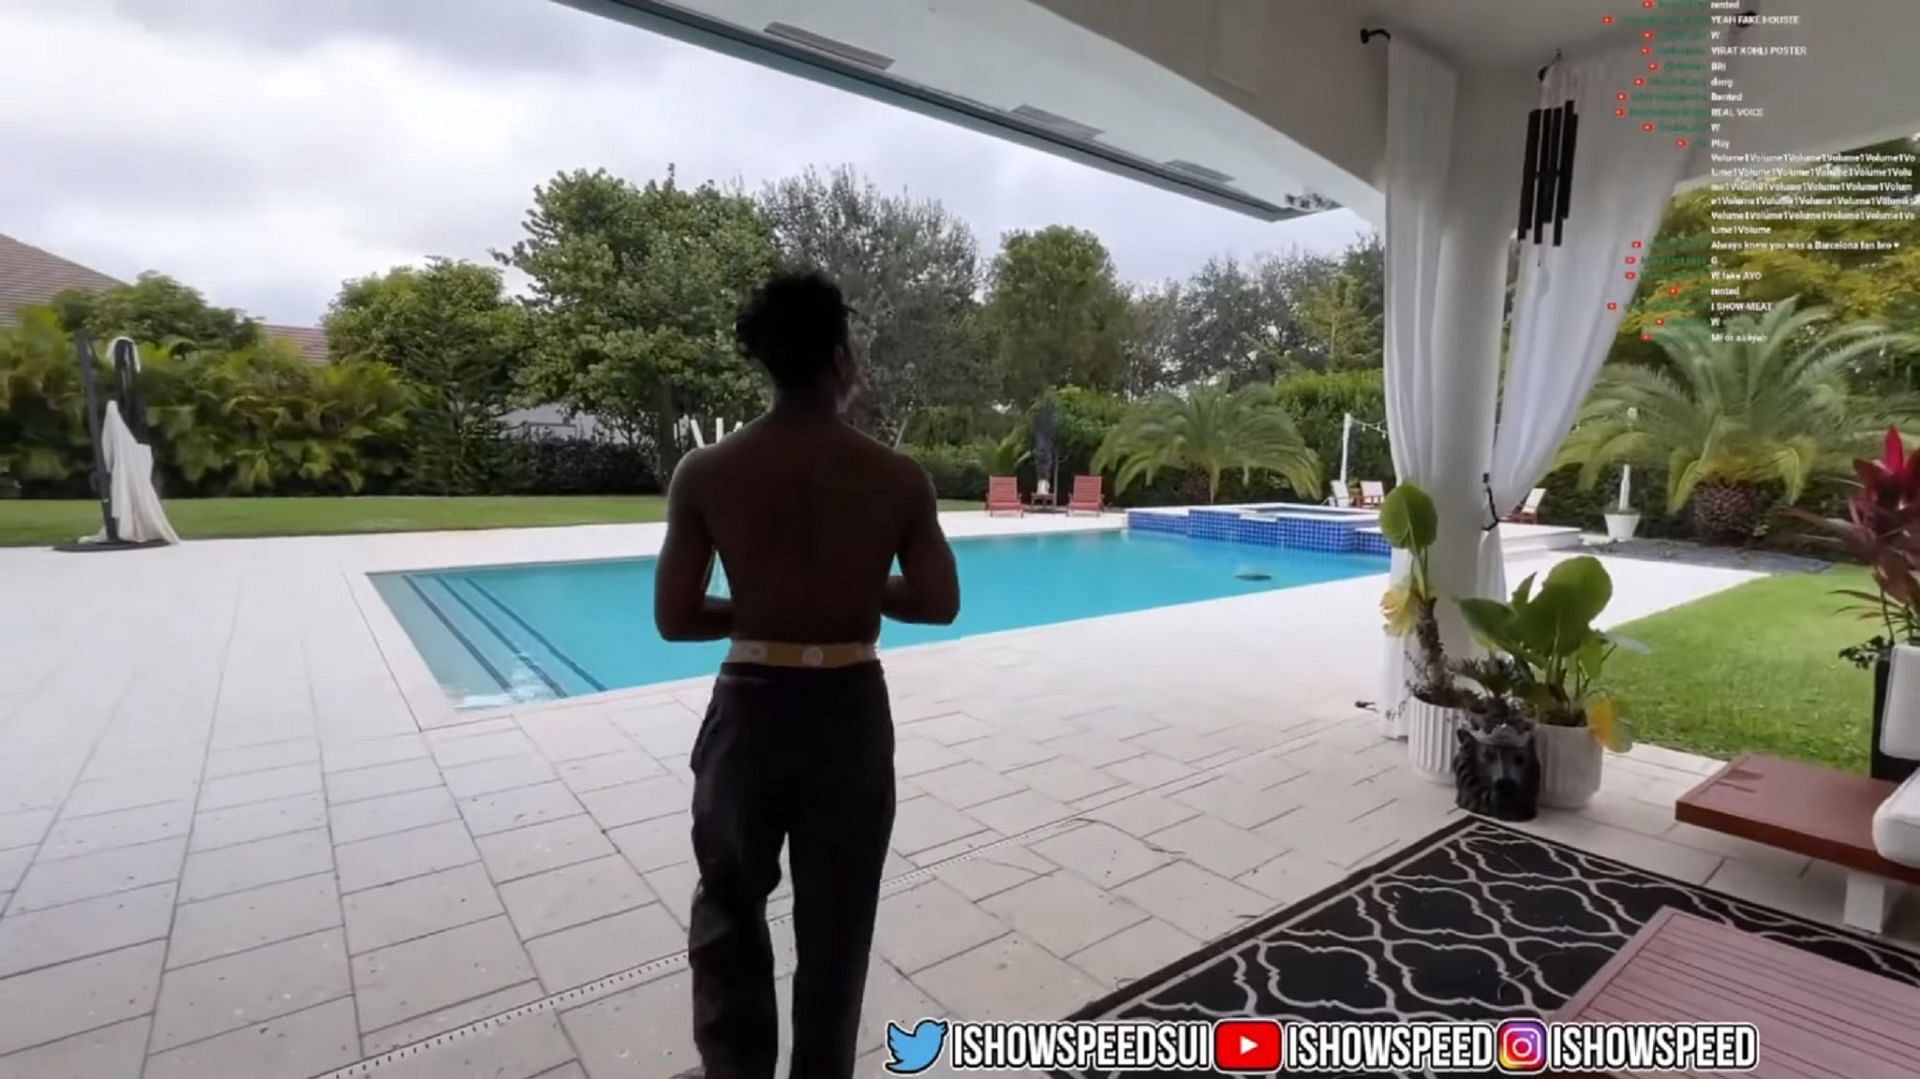 How much is IShowSpeed's mansion worth?  star's new residence  explored